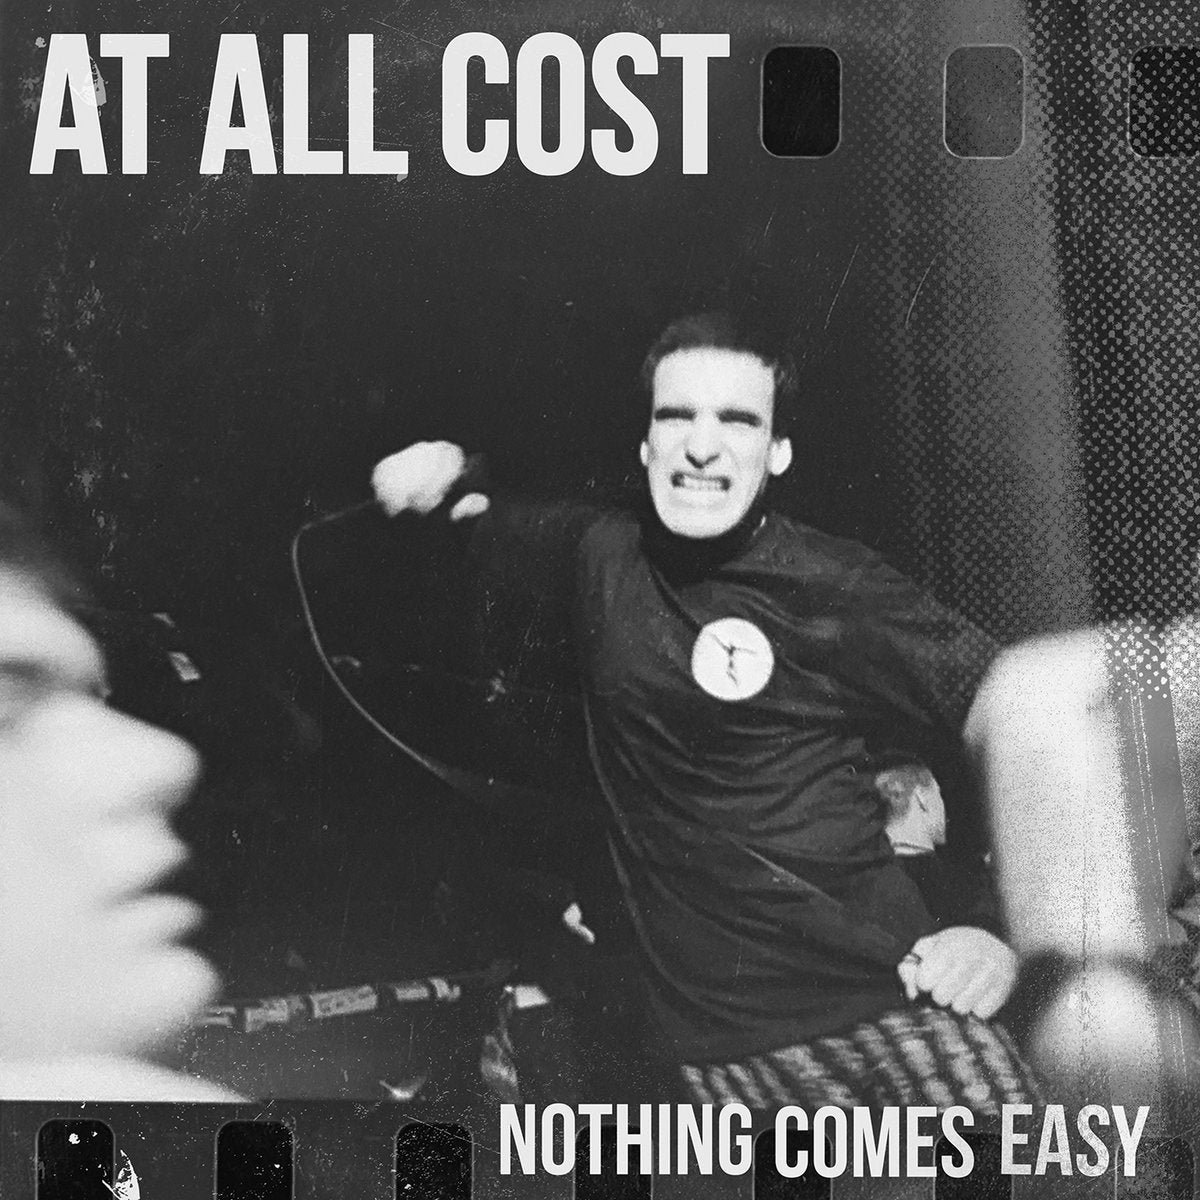 At All Cost "Nothing Comes Easy" 12" Vinyl